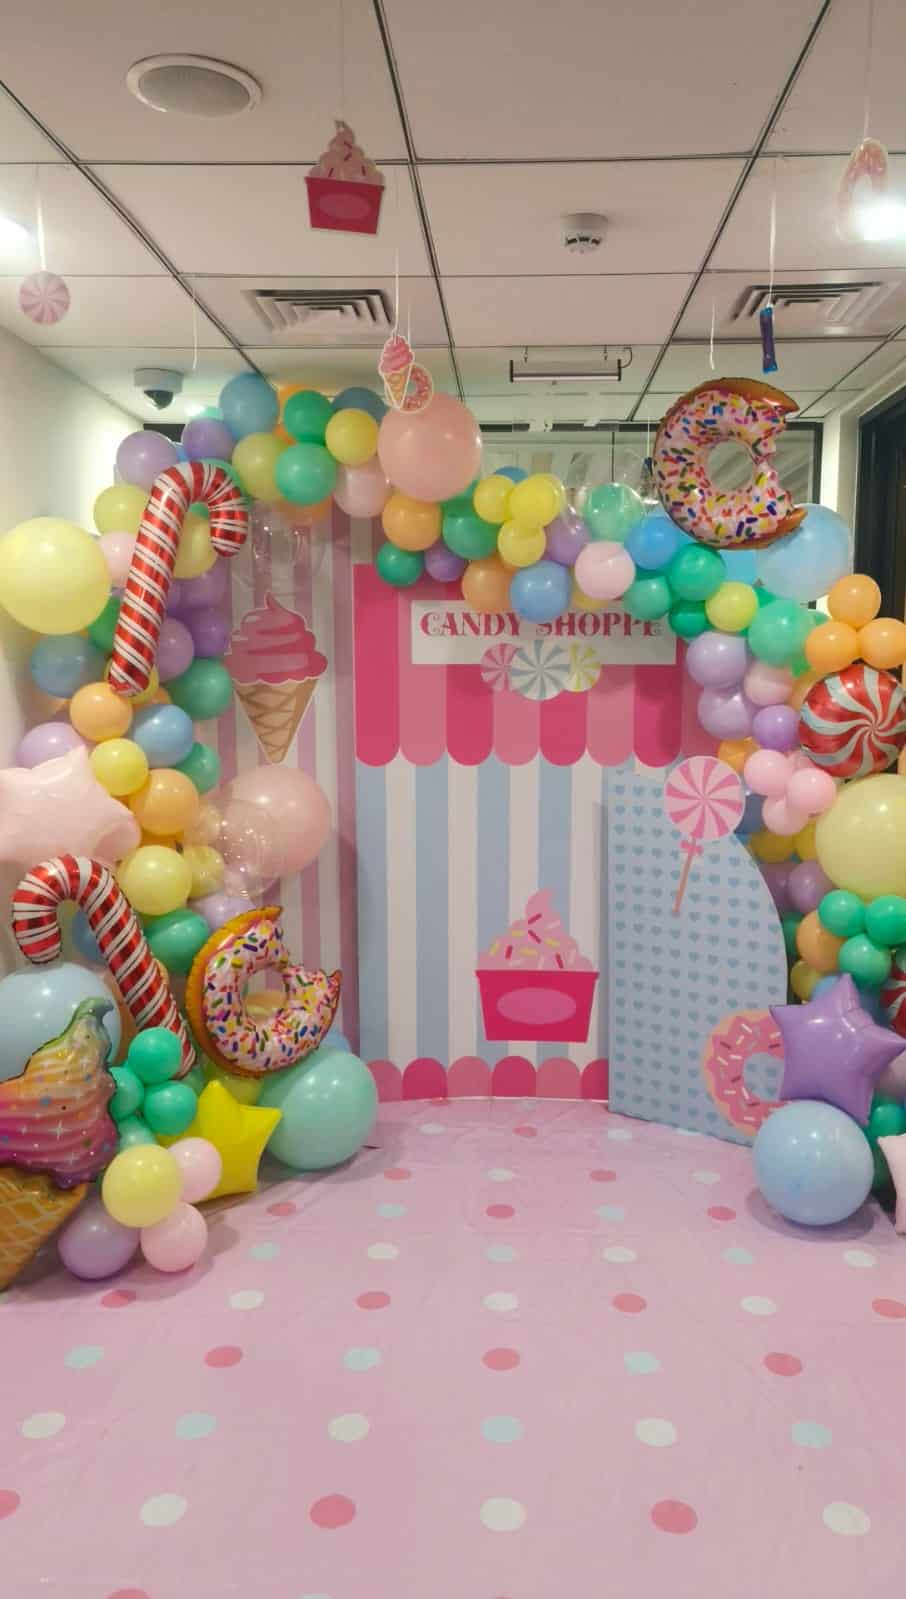 Candyland Theme Party Decoration In Kroll's Corporate Office - CherishX ...